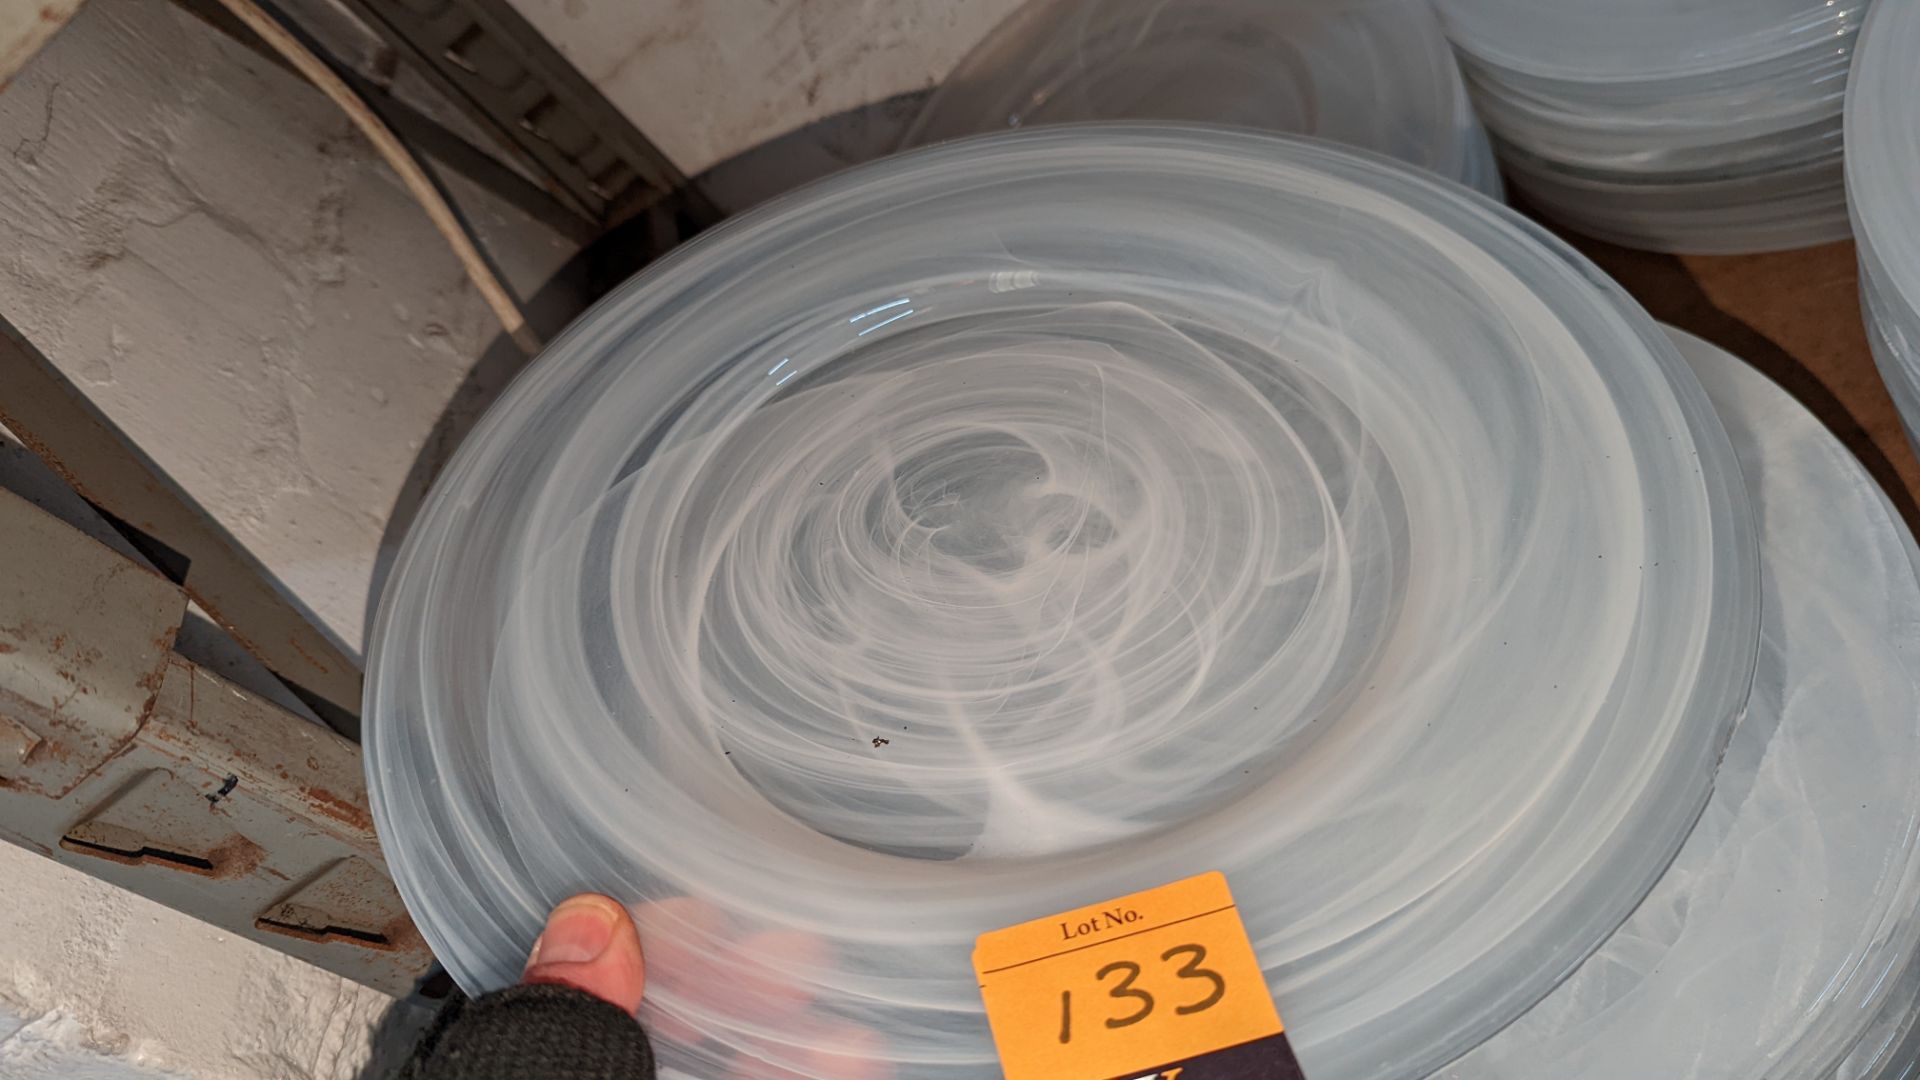 30 off large clear/white patterned glass plates/chargers, each measuring approximately 330mm diamete - Image 3 of 3